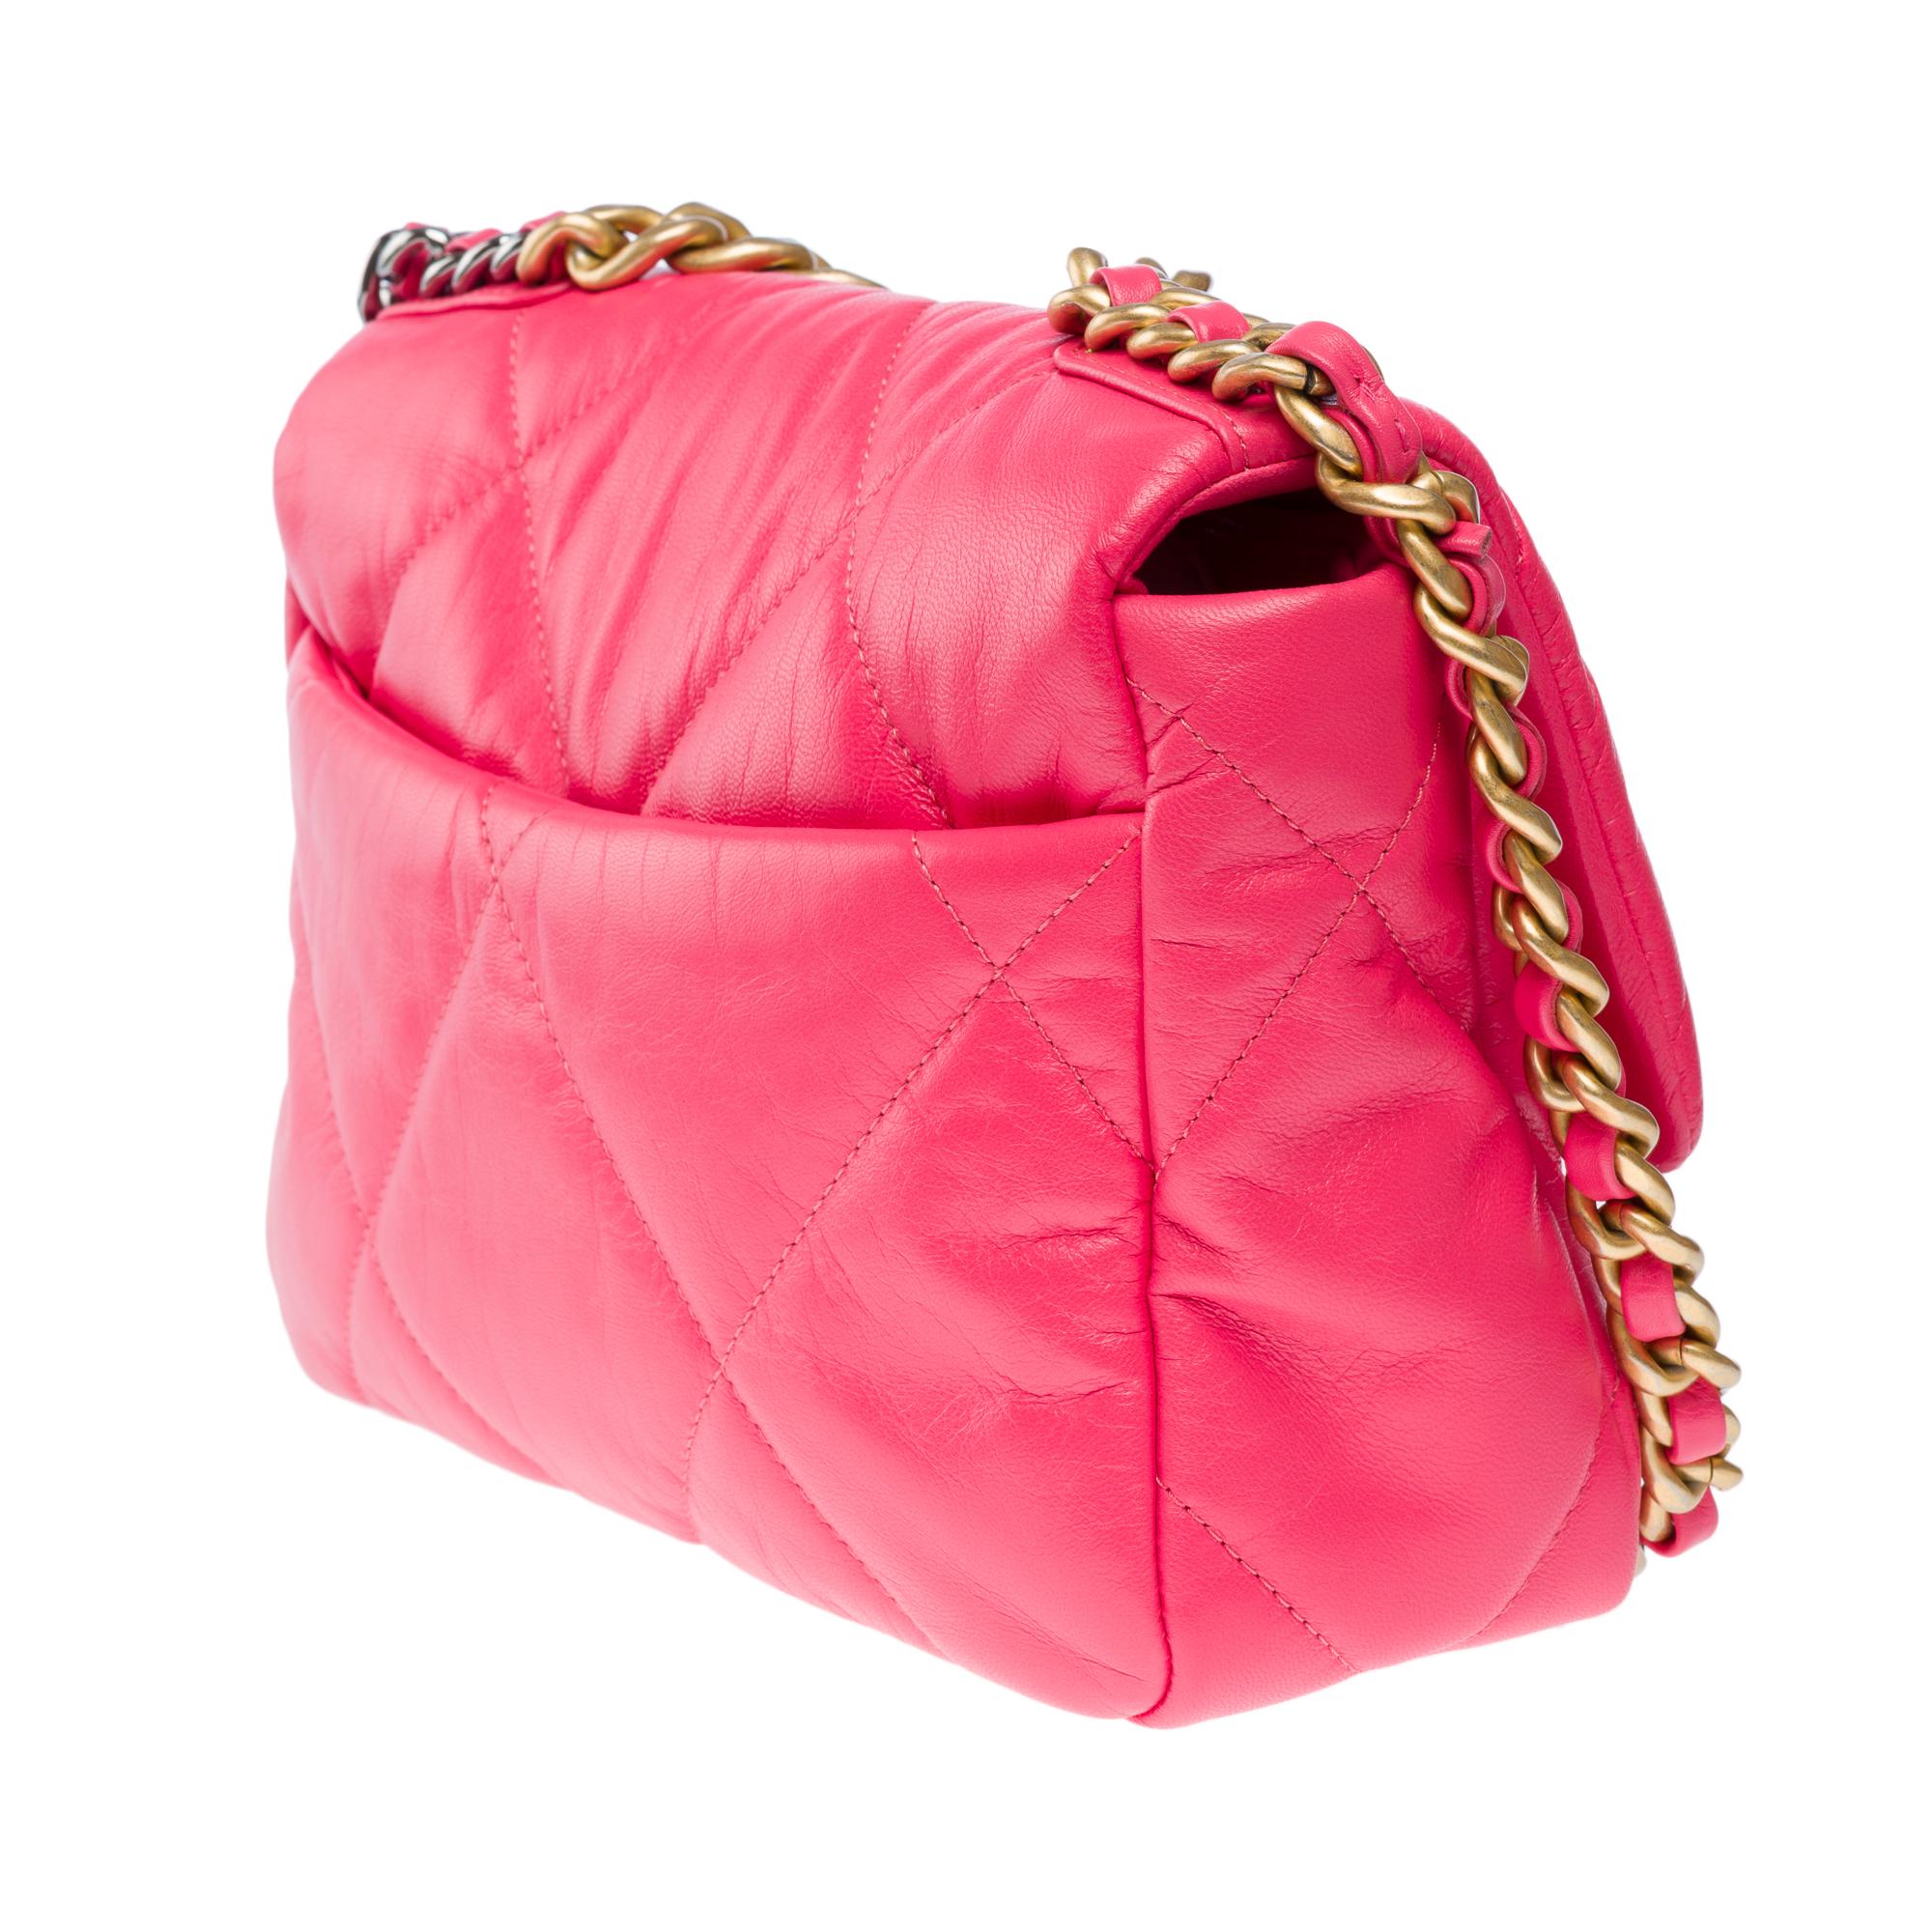 Stunning Chanel 19 shoulder bag in Pink quilted leather , Matt gold and SHW For Sale 3